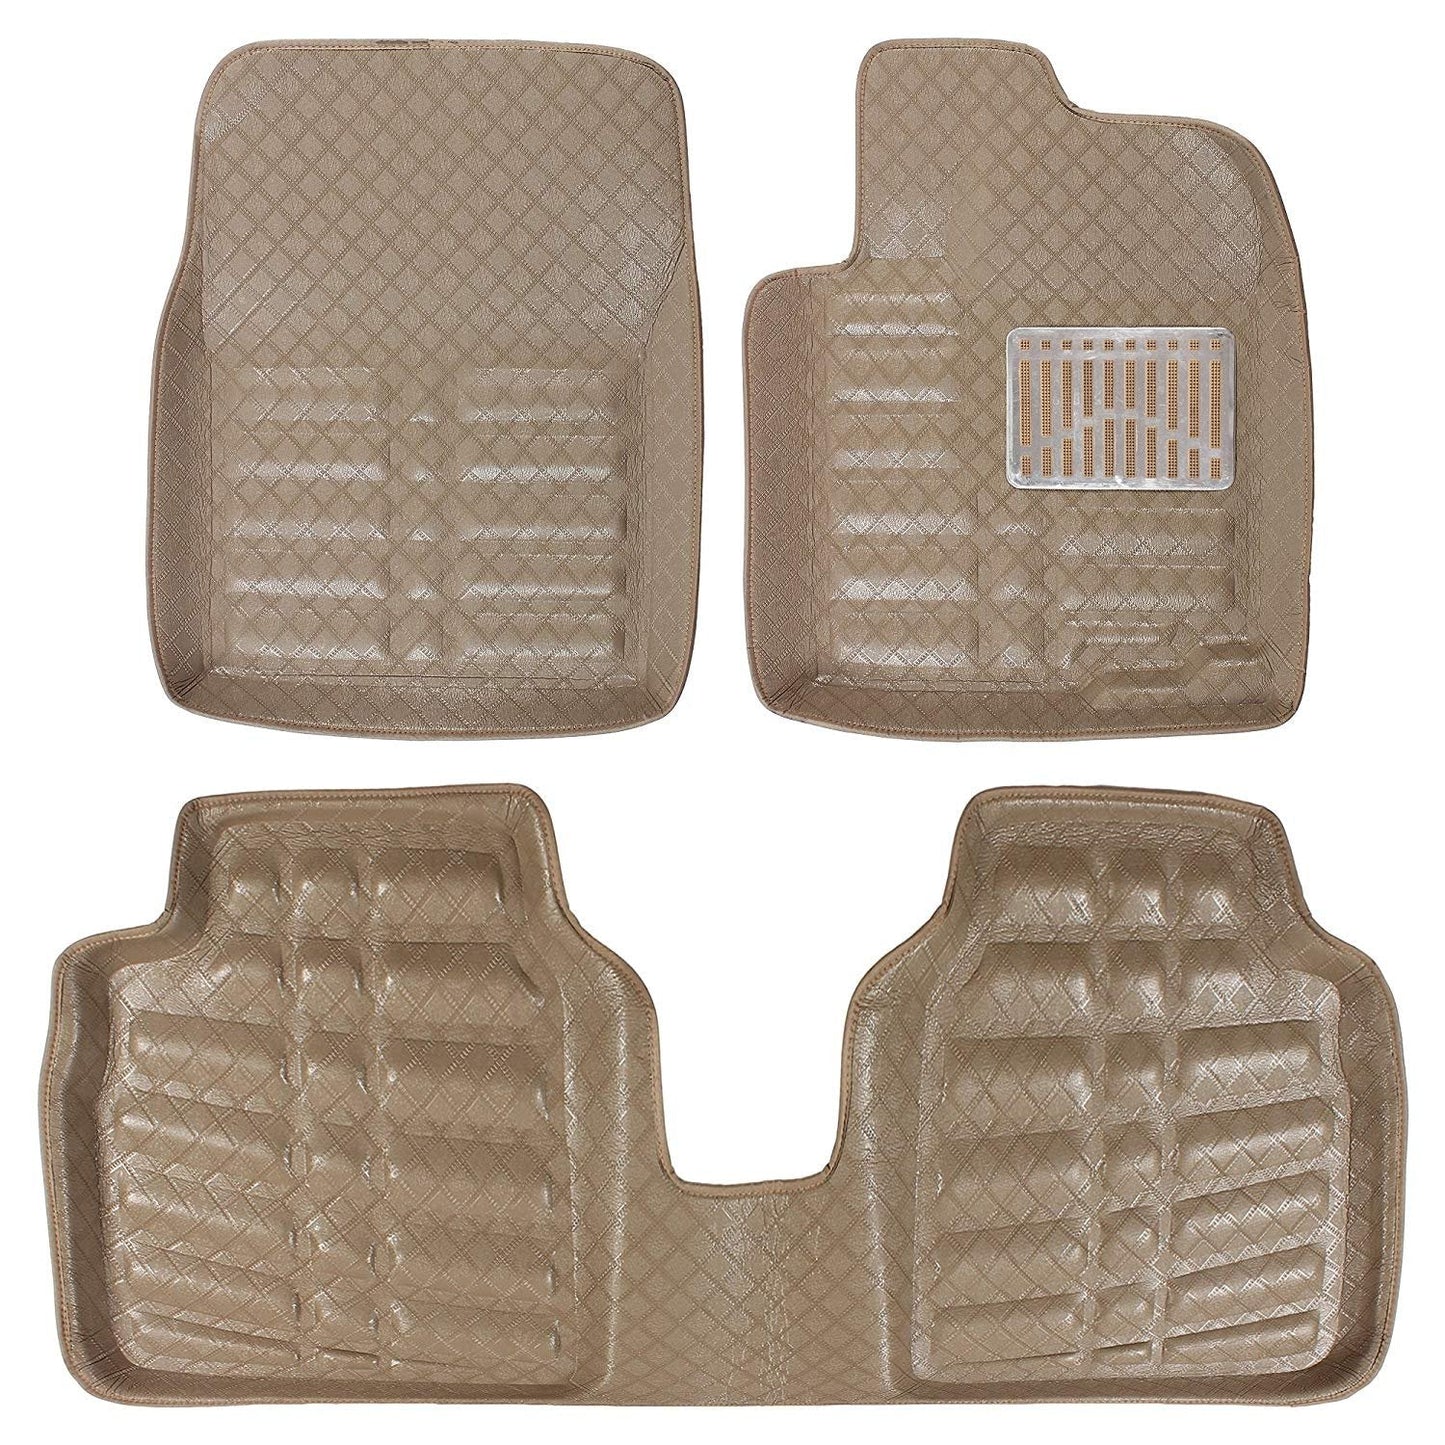 Oshotto 4D Artificial Leather Car Floor Mats For Maruti Suzuki XL6 - Set of 4 (Complete Mat with Third Row) - Beige